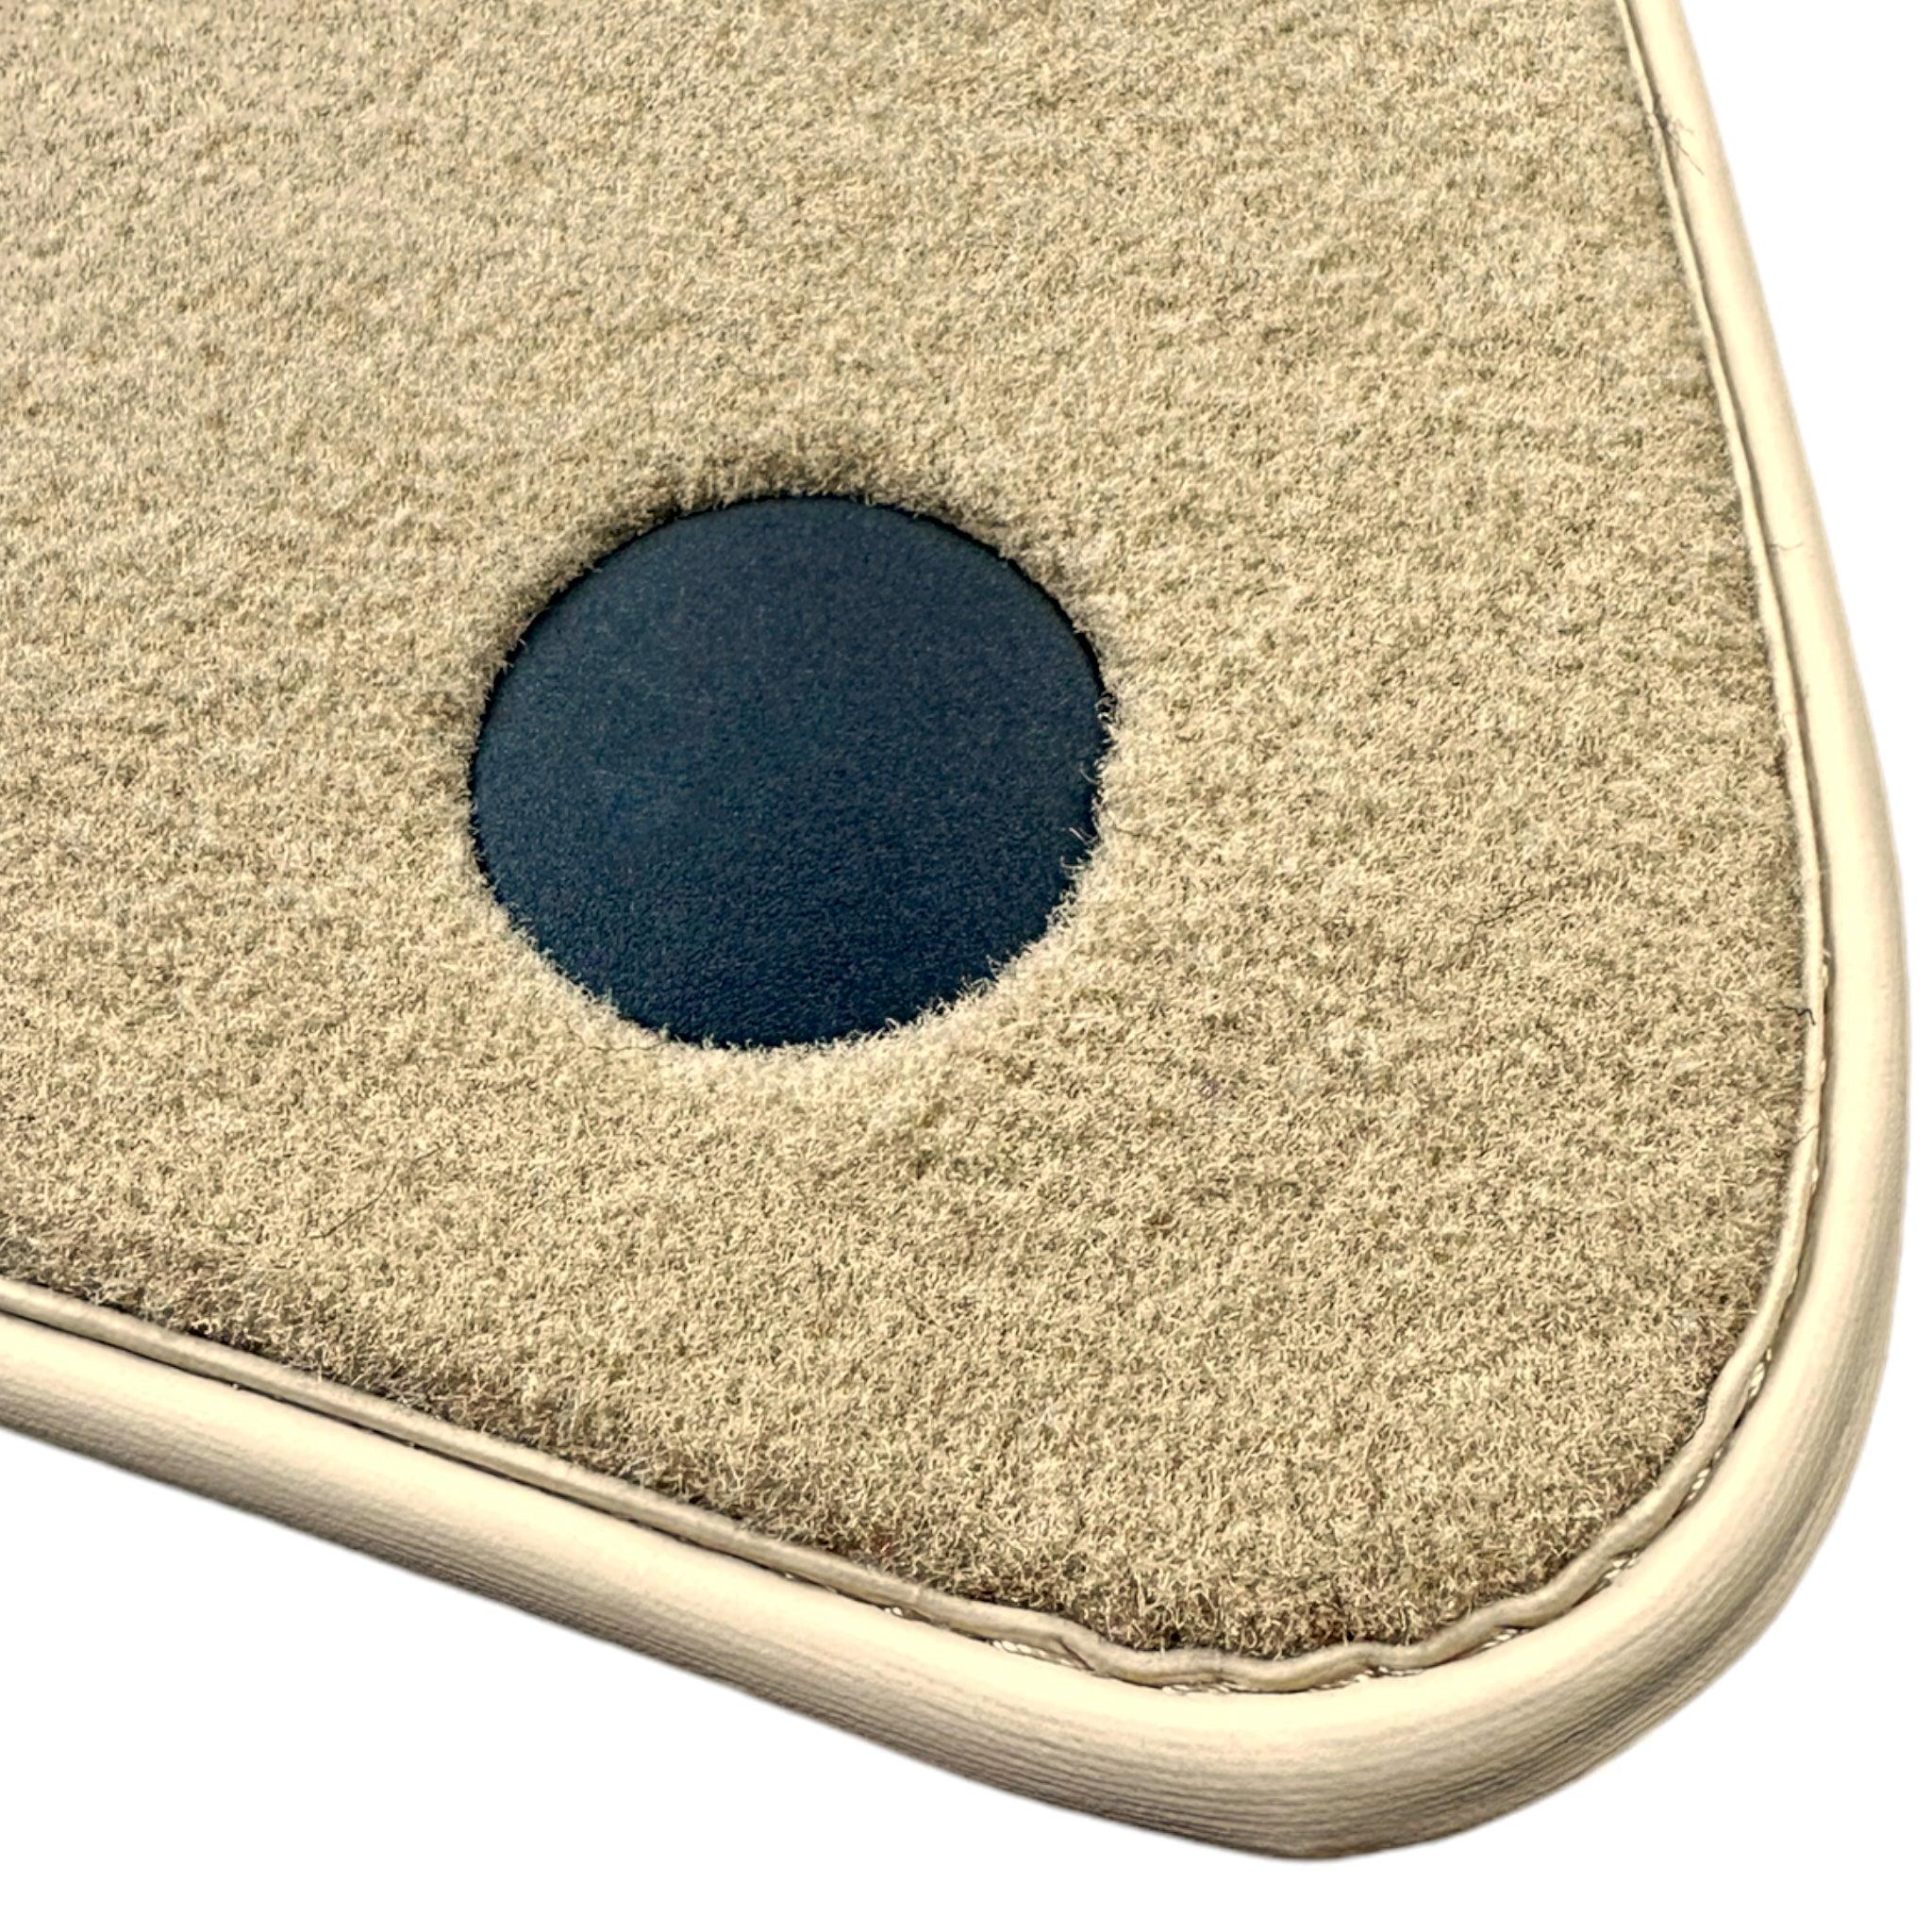 Beige Floor Mats For Mercedes Benz S-Class Z223 Maybach (2021-2023) | Limited Edition